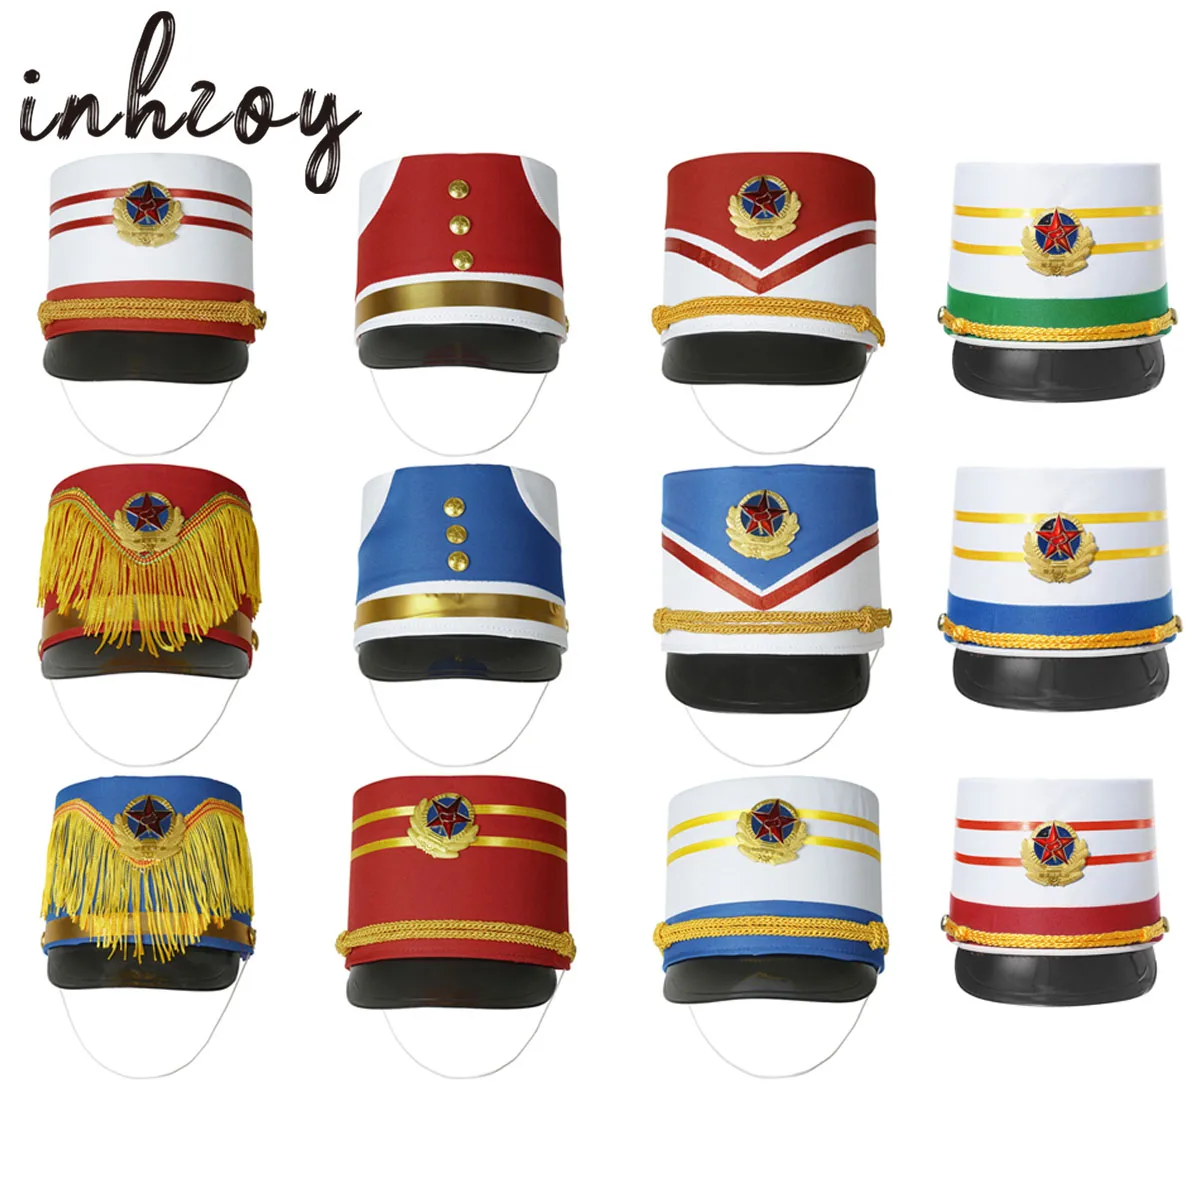 Kids Marching Band Hat Stylish Military Soldier Major Hat Luxury Halloween Stage Performance Cosplay Cap Drum Band Hat Costume